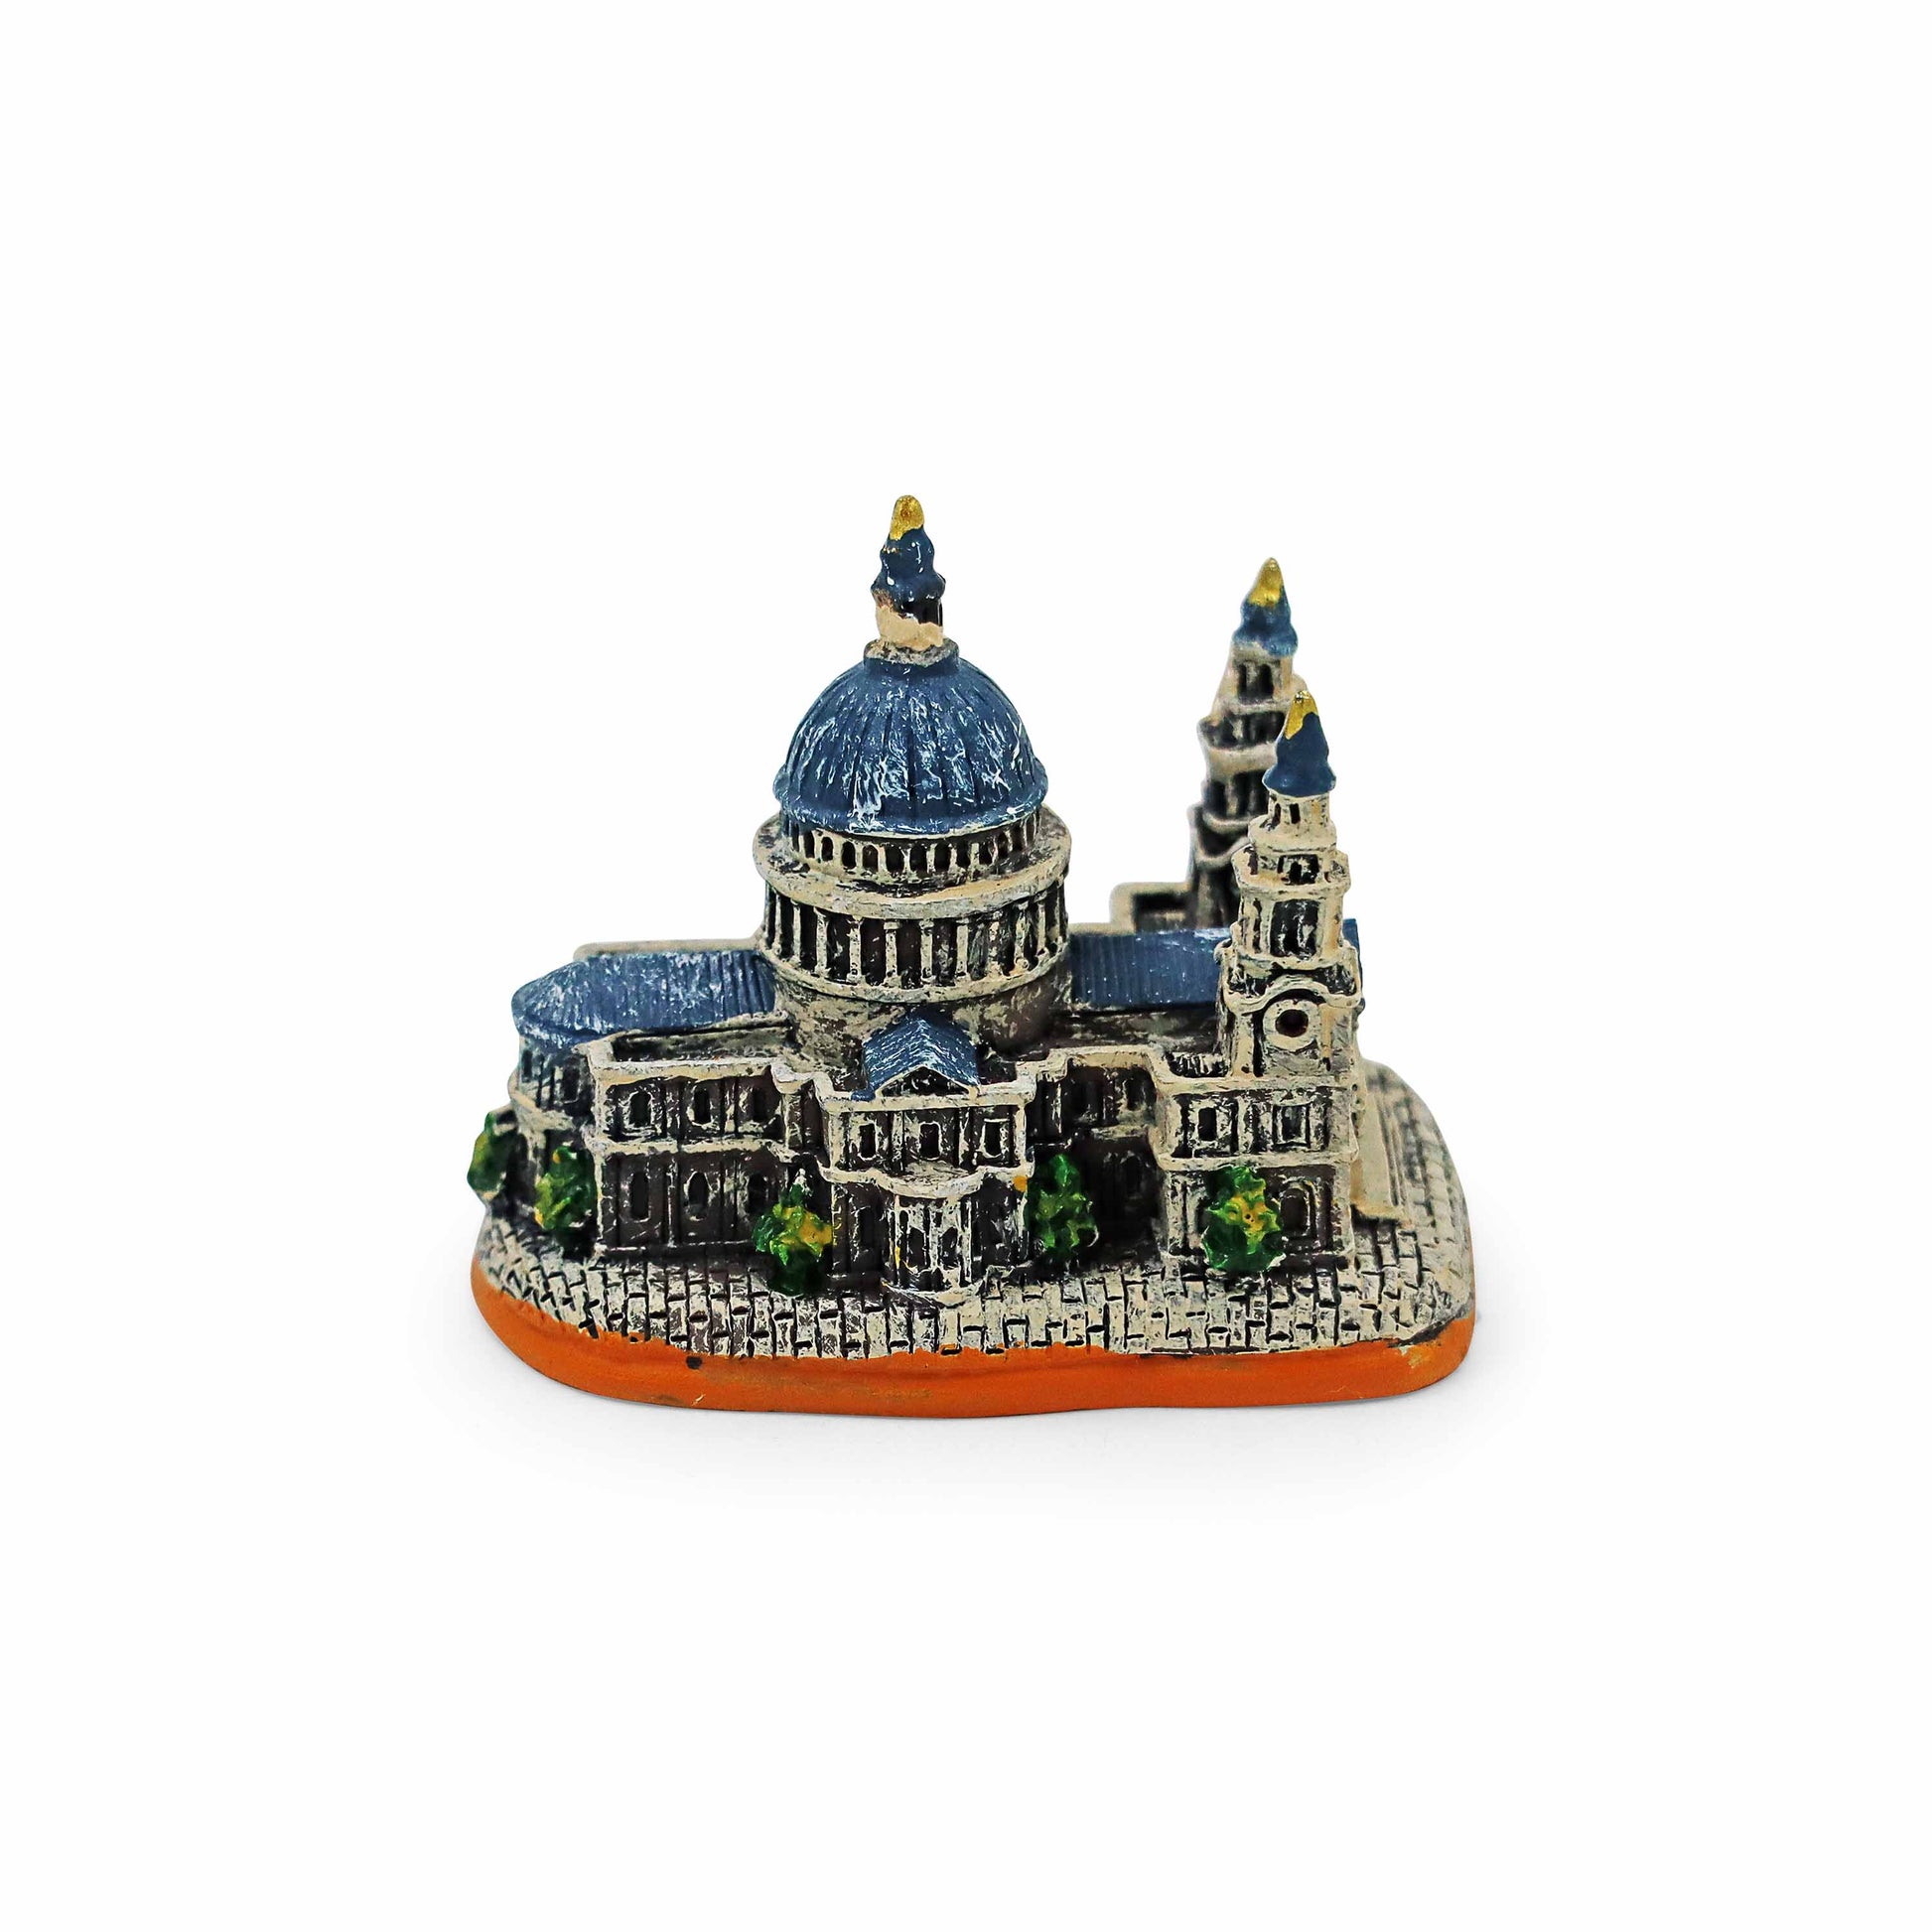 St Paul's Cathedral - Mini Stone Model - British Souvenirs 7 Gifts